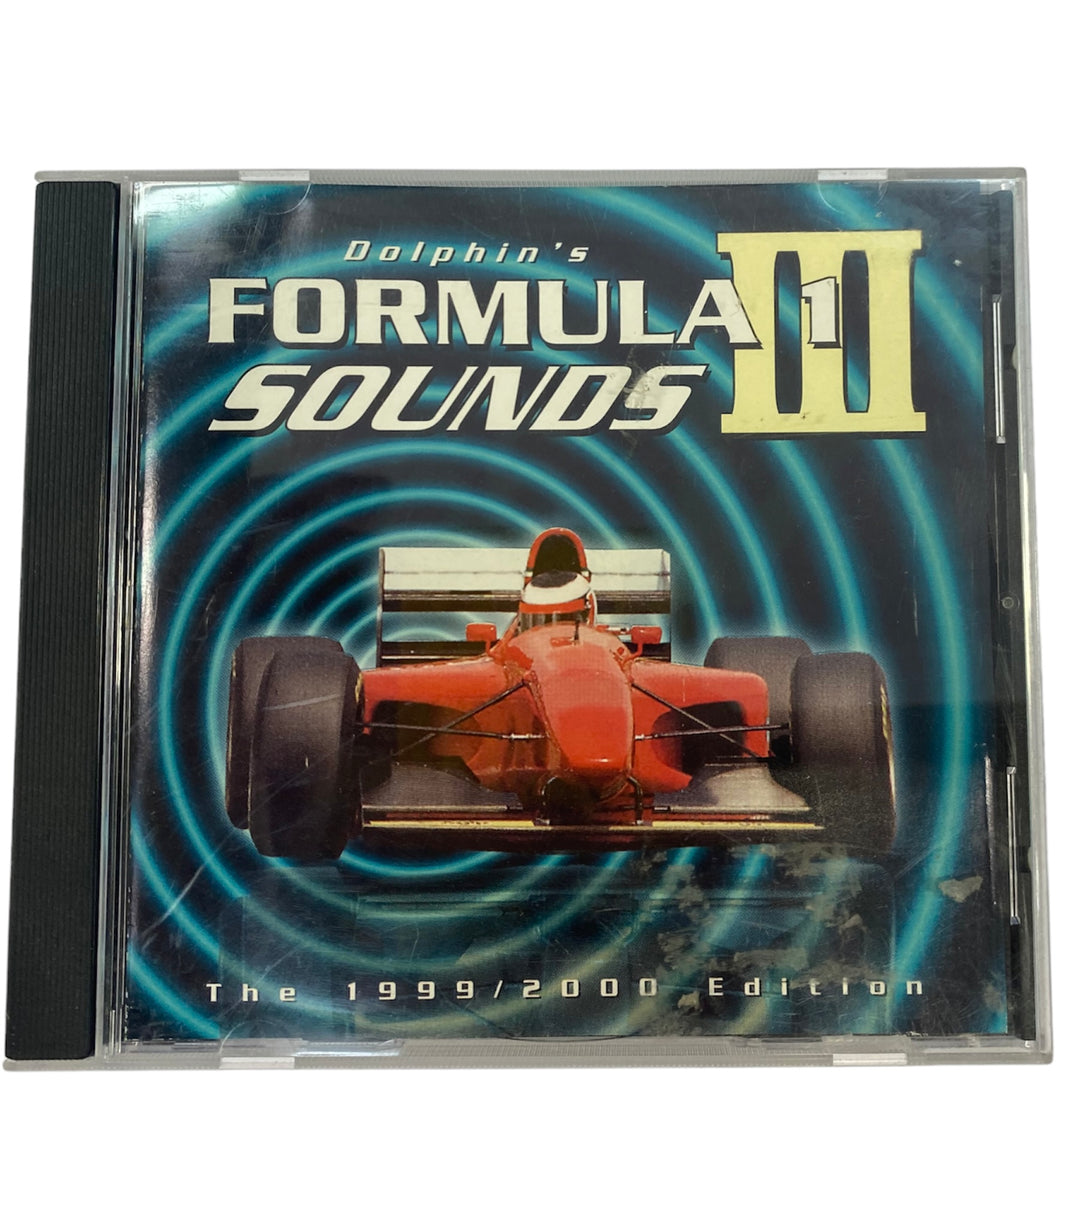 The Best of Formula 1 Sounds  III CD  1999/2000 Edition 